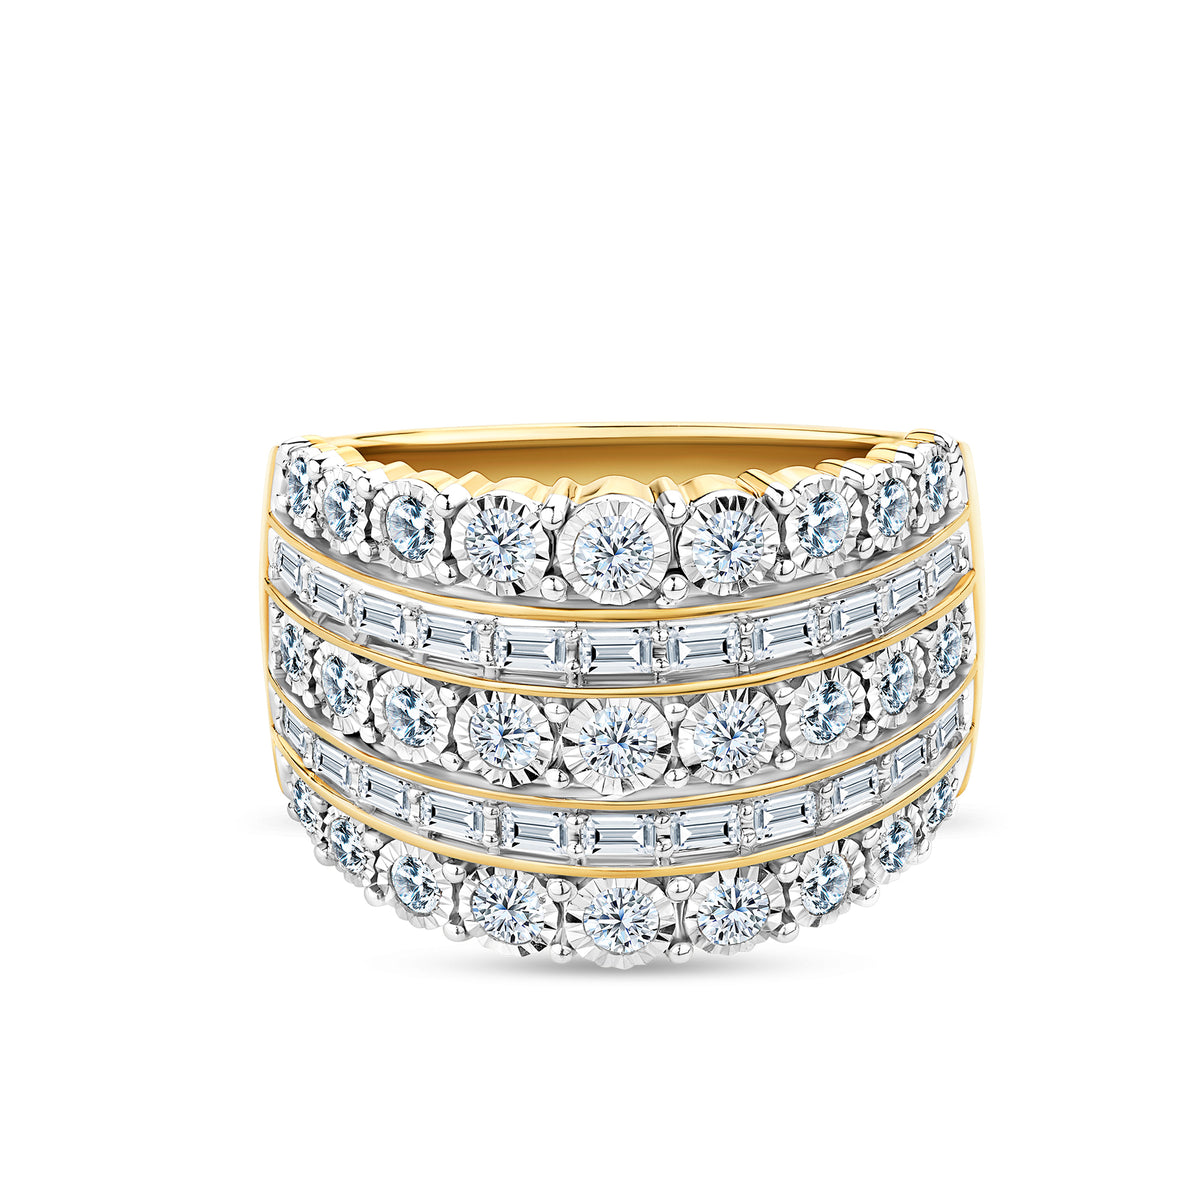 1.00ct TW Diamond Cluster Ring in 9ct Yellow & White Gold